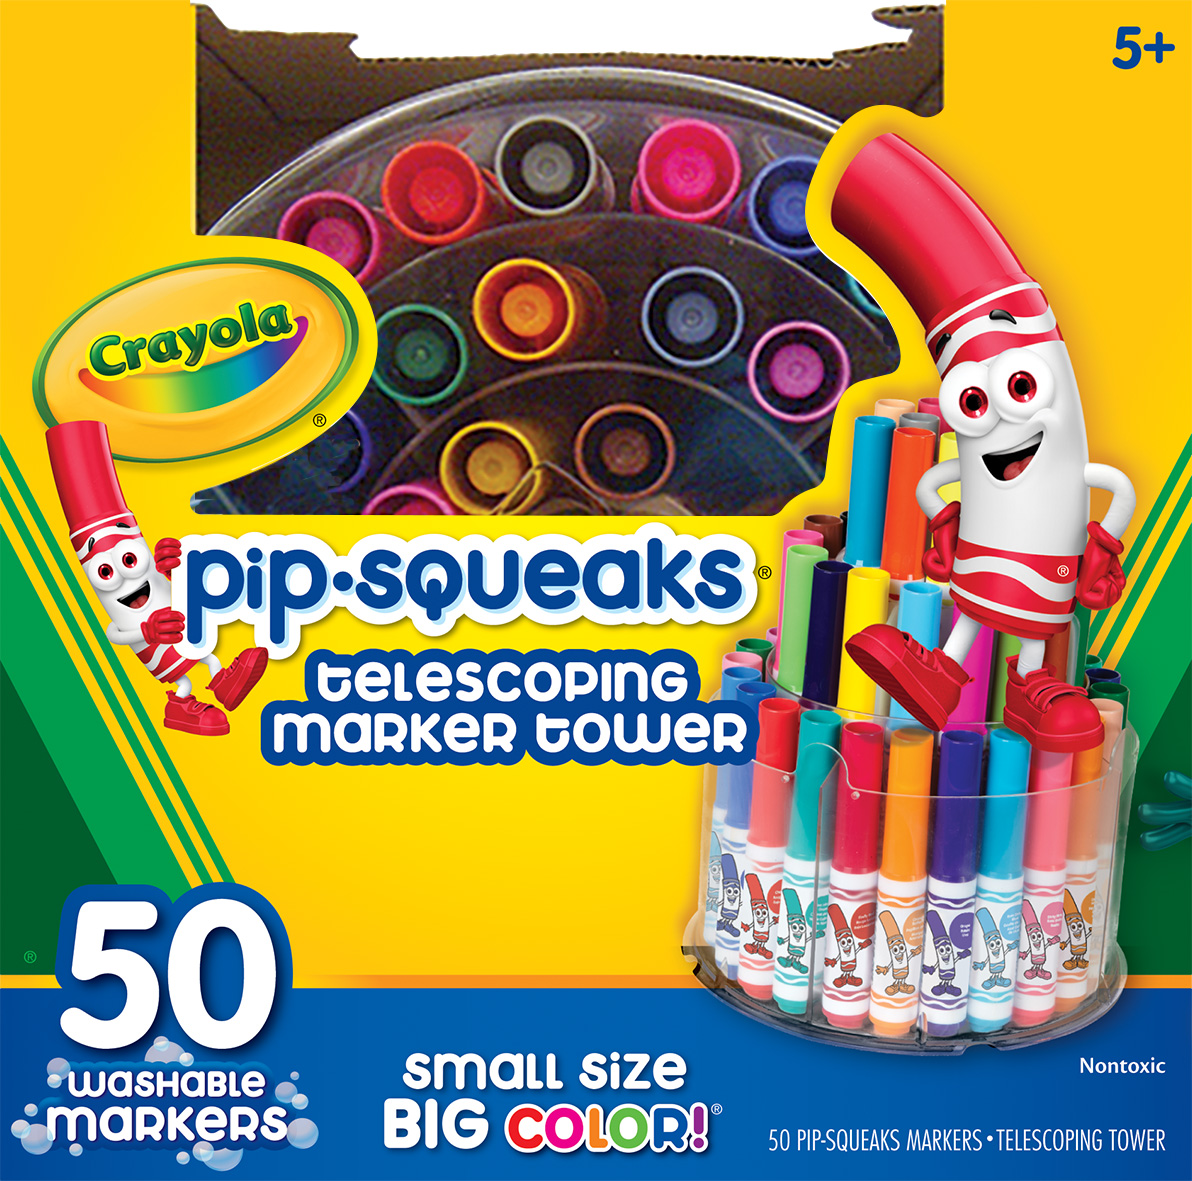 Crayola Pip Squeaks Marker Tower, Assorted Colors, 50 Washable Markers, Toys for Kids - image 1 of 6